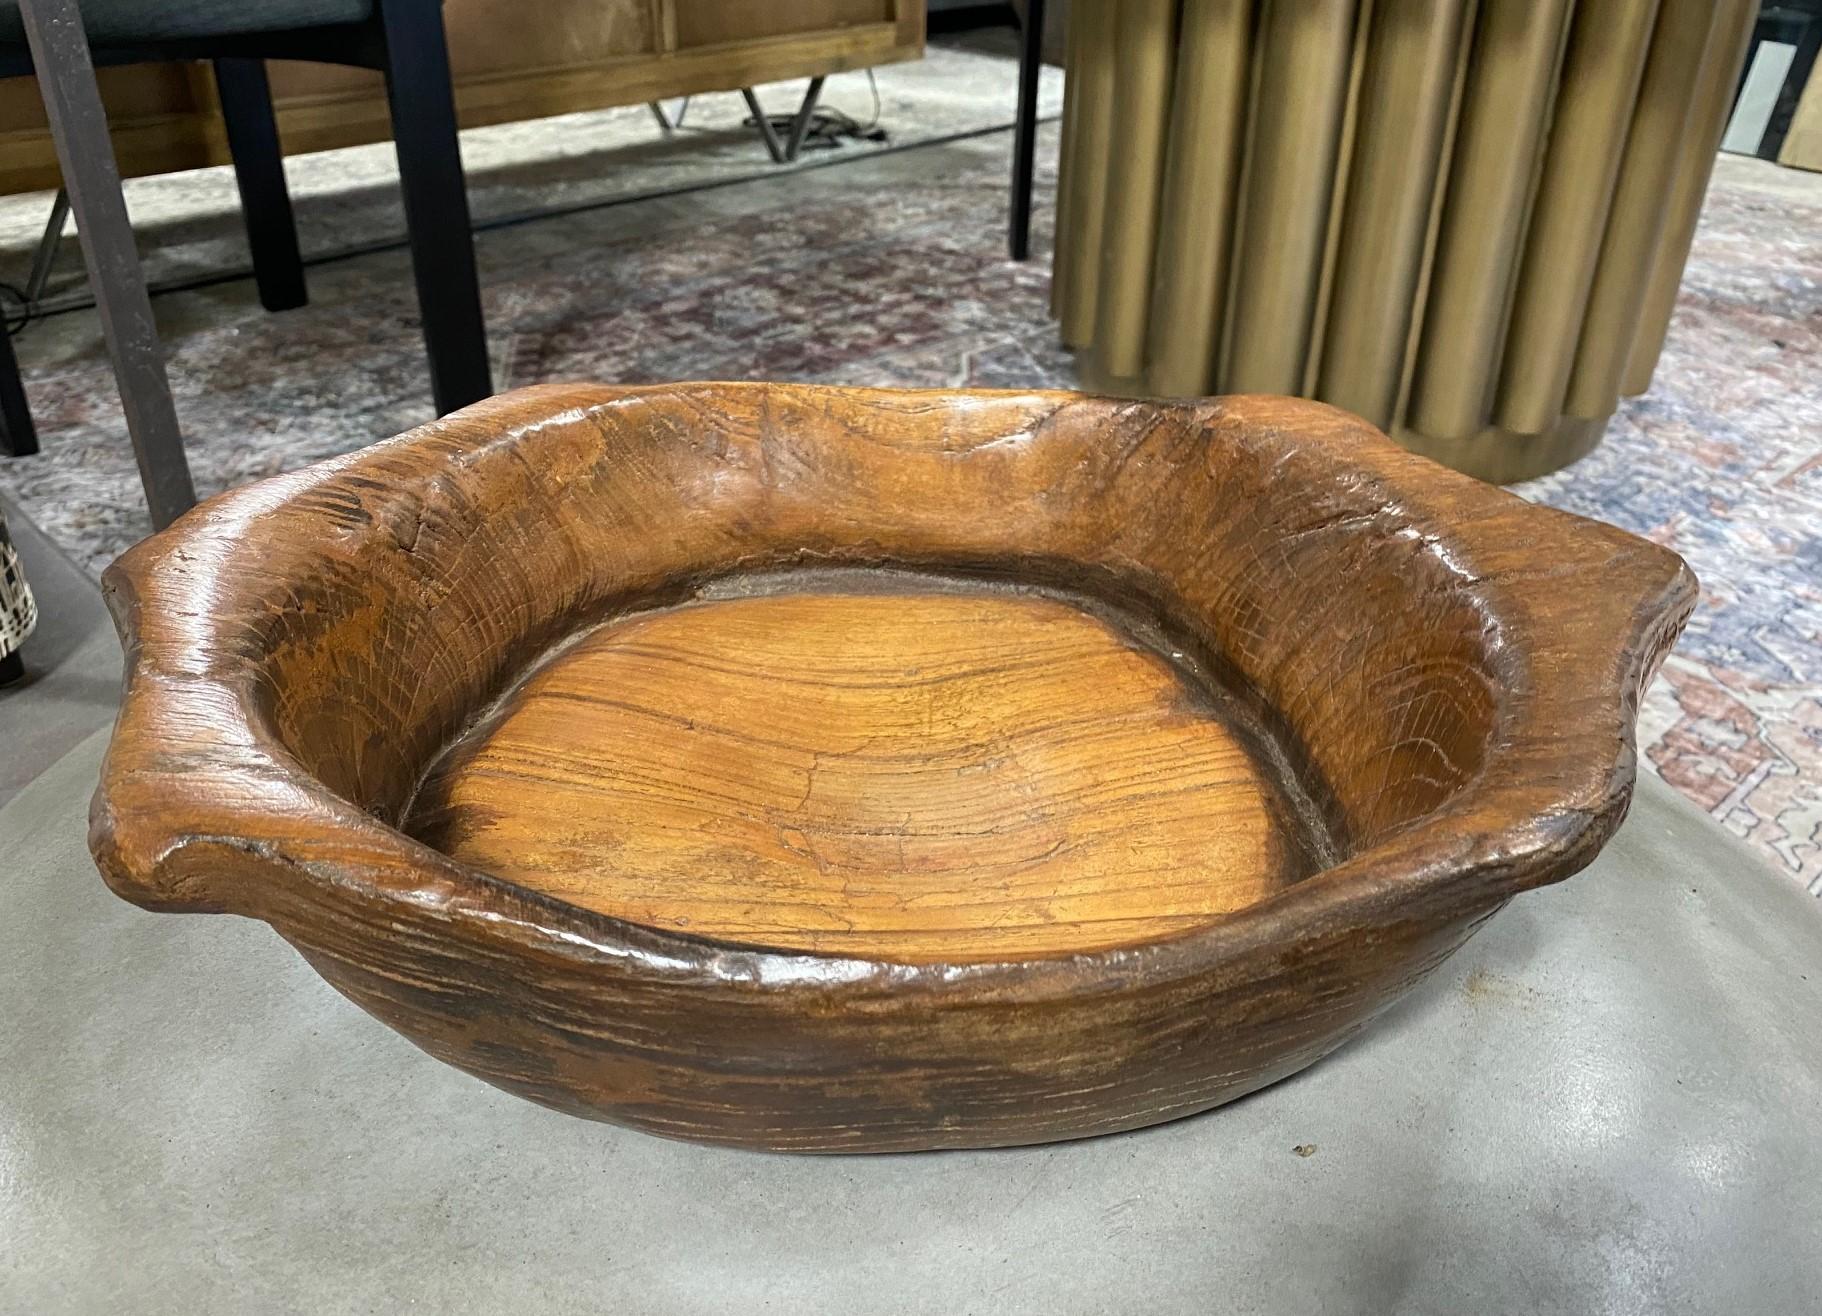 A wonderful bowl with beautiful natural wood grain and glowing colorful patina acquired with age. This piece has a very organic, wabi-sabi feel to it.

From a collection of older wood bowls.

Would clearly stand out in about any collection or